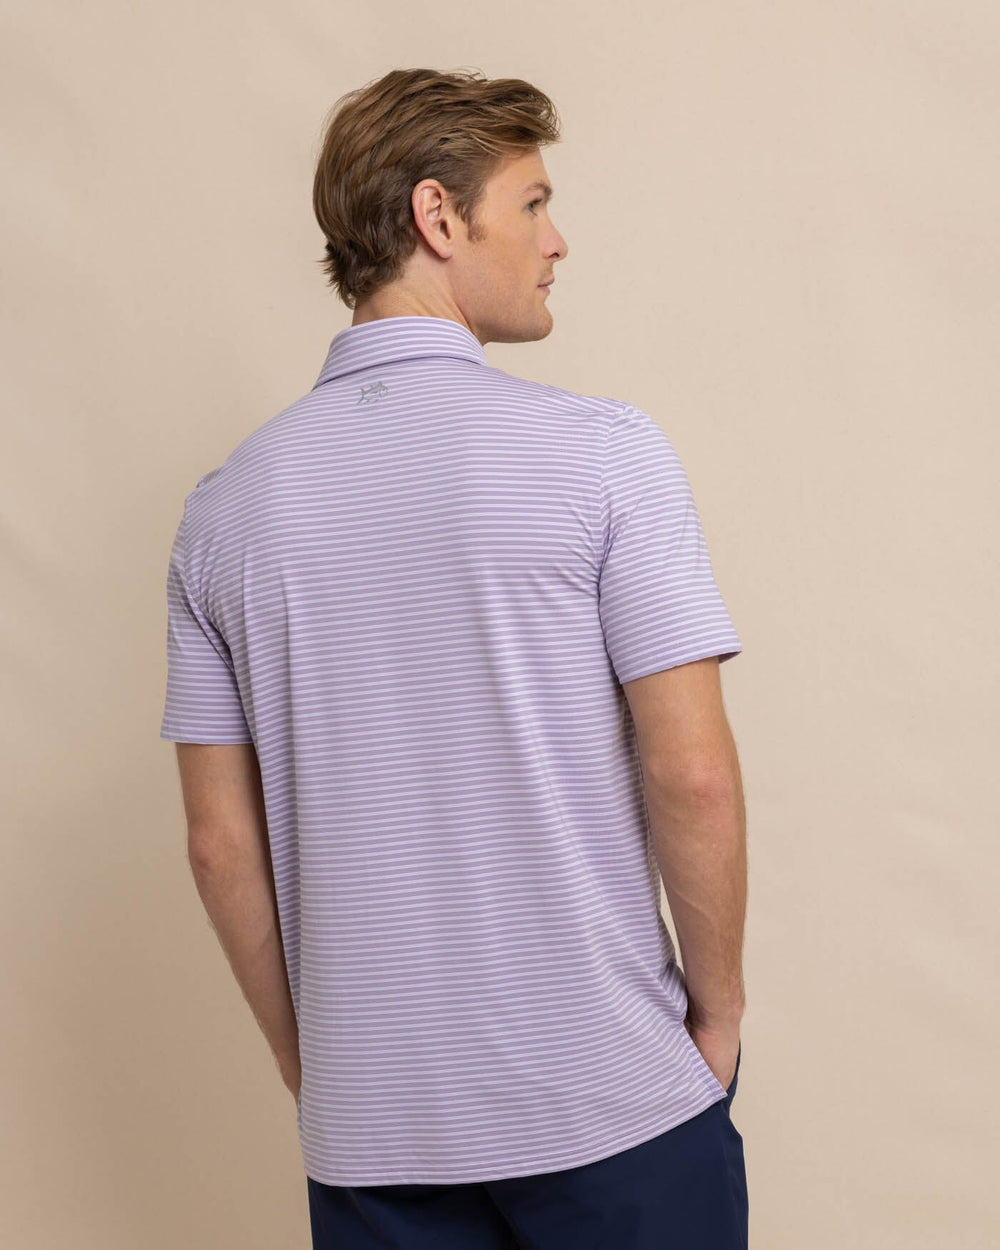 The back view of the Southern Tide brrr eeze Beattie Stripe Performance Polo by Southern Tide - Wisteria Purple